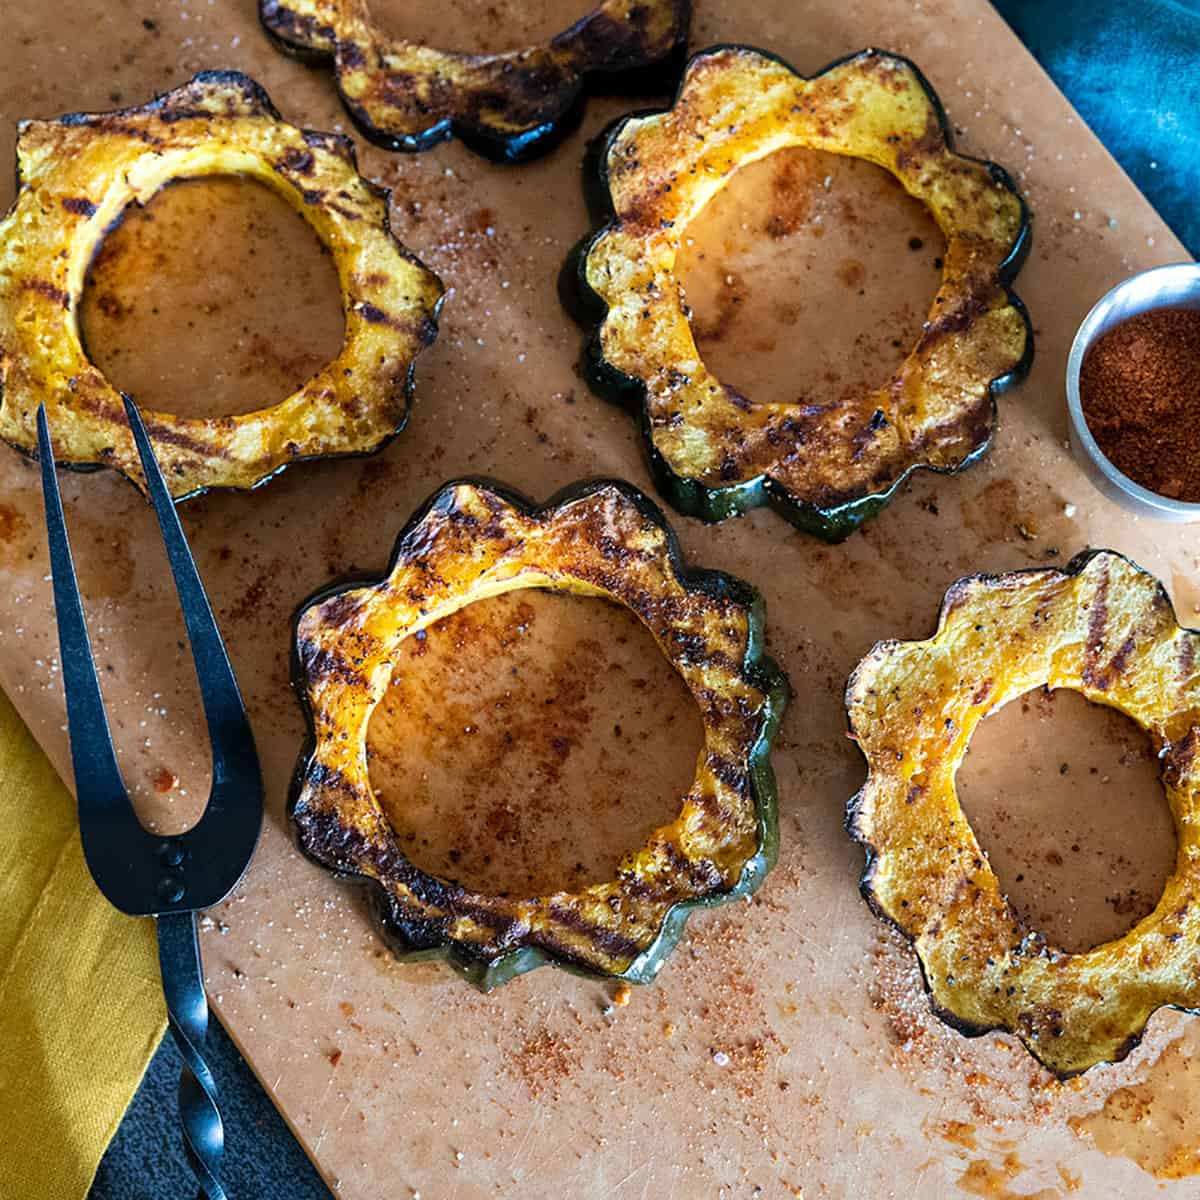 grilled acorn squash rings on platter by fork.